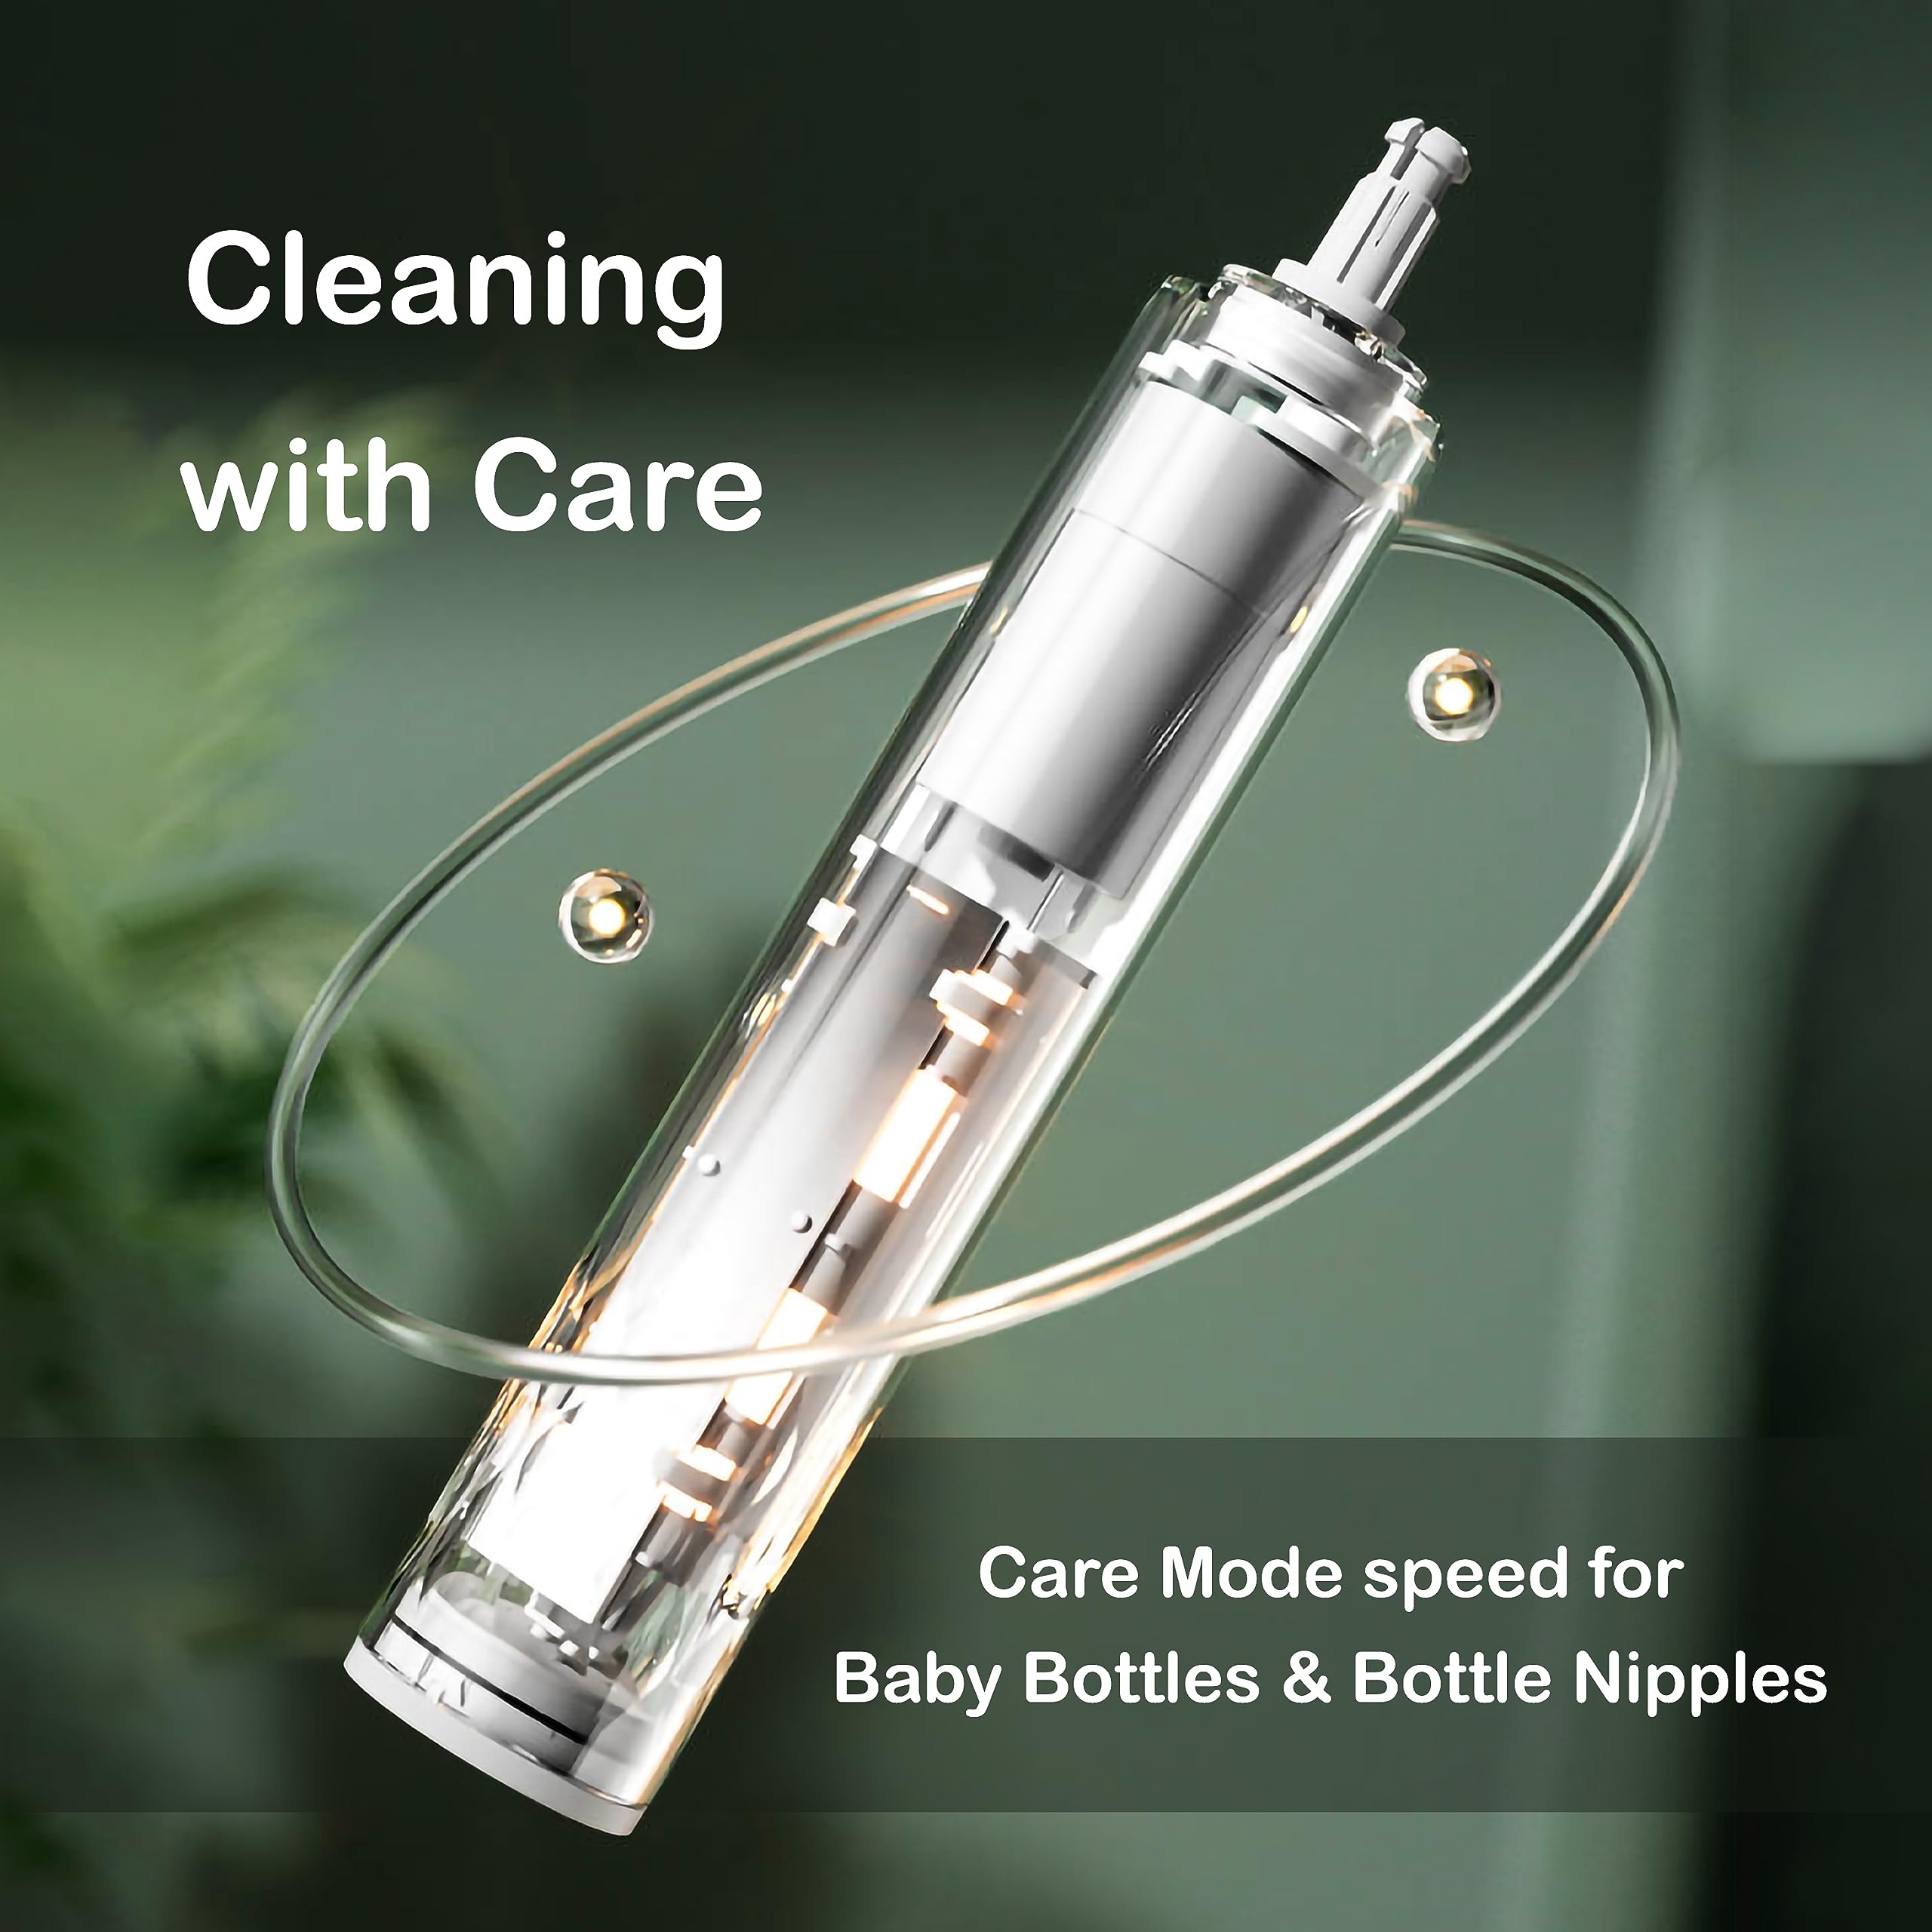 Electric Bottle Cleaner Brush for Baby Bottles - Electric Bottle Brush Cleaner, Baby Bottle Washer with Nipple Brush and Straw Cleaner Brush - Take Care of Your Family with Electric Baby Bottle Brush